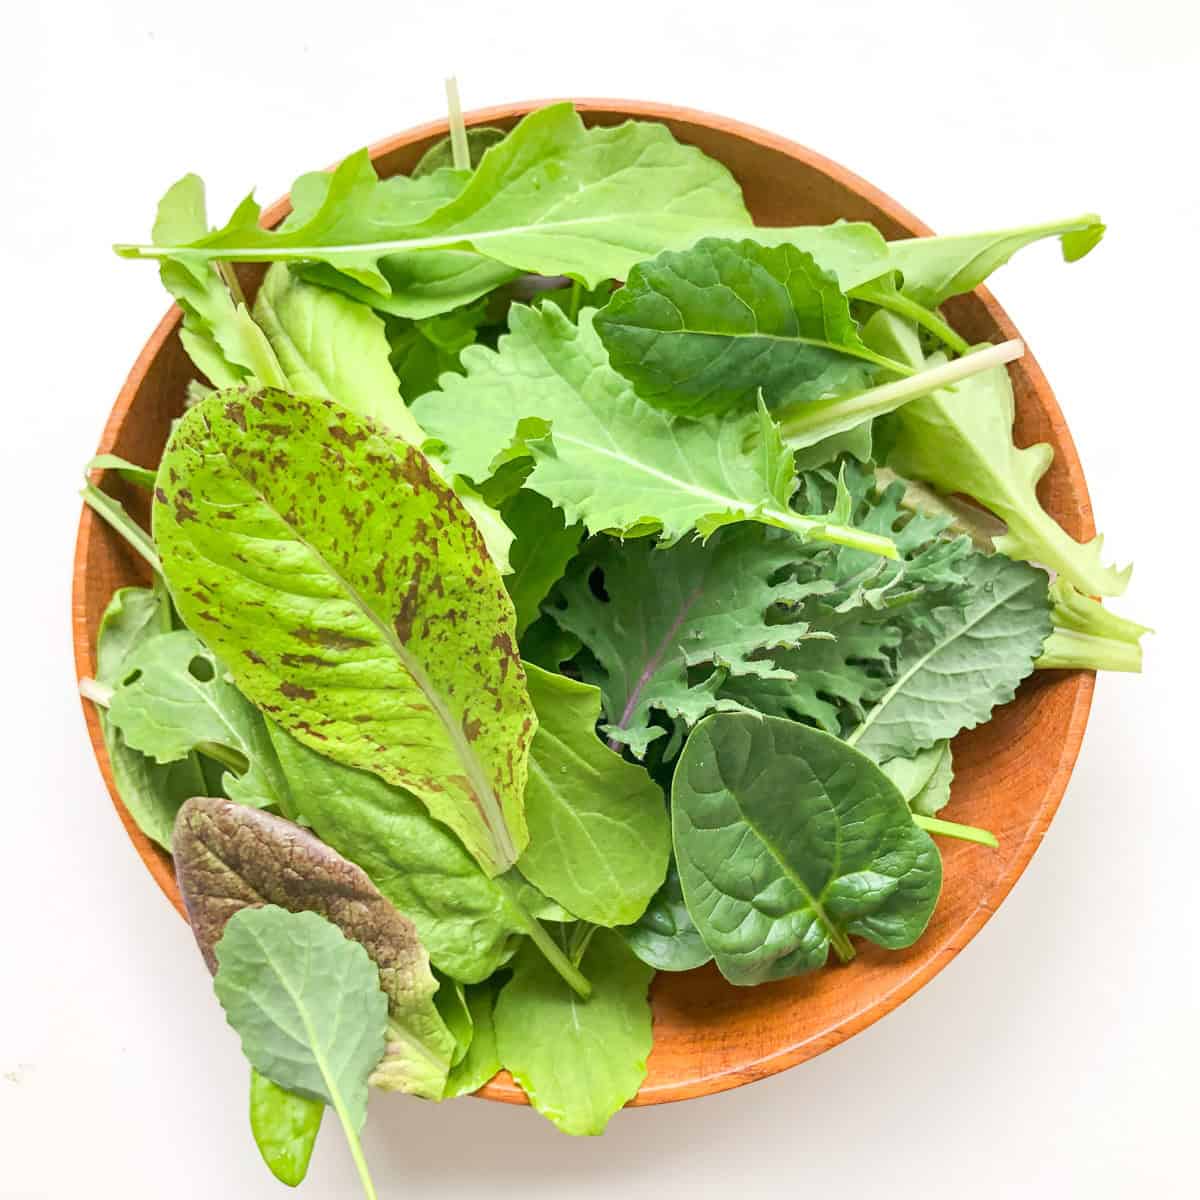 A wooden bowl containing salad greens.